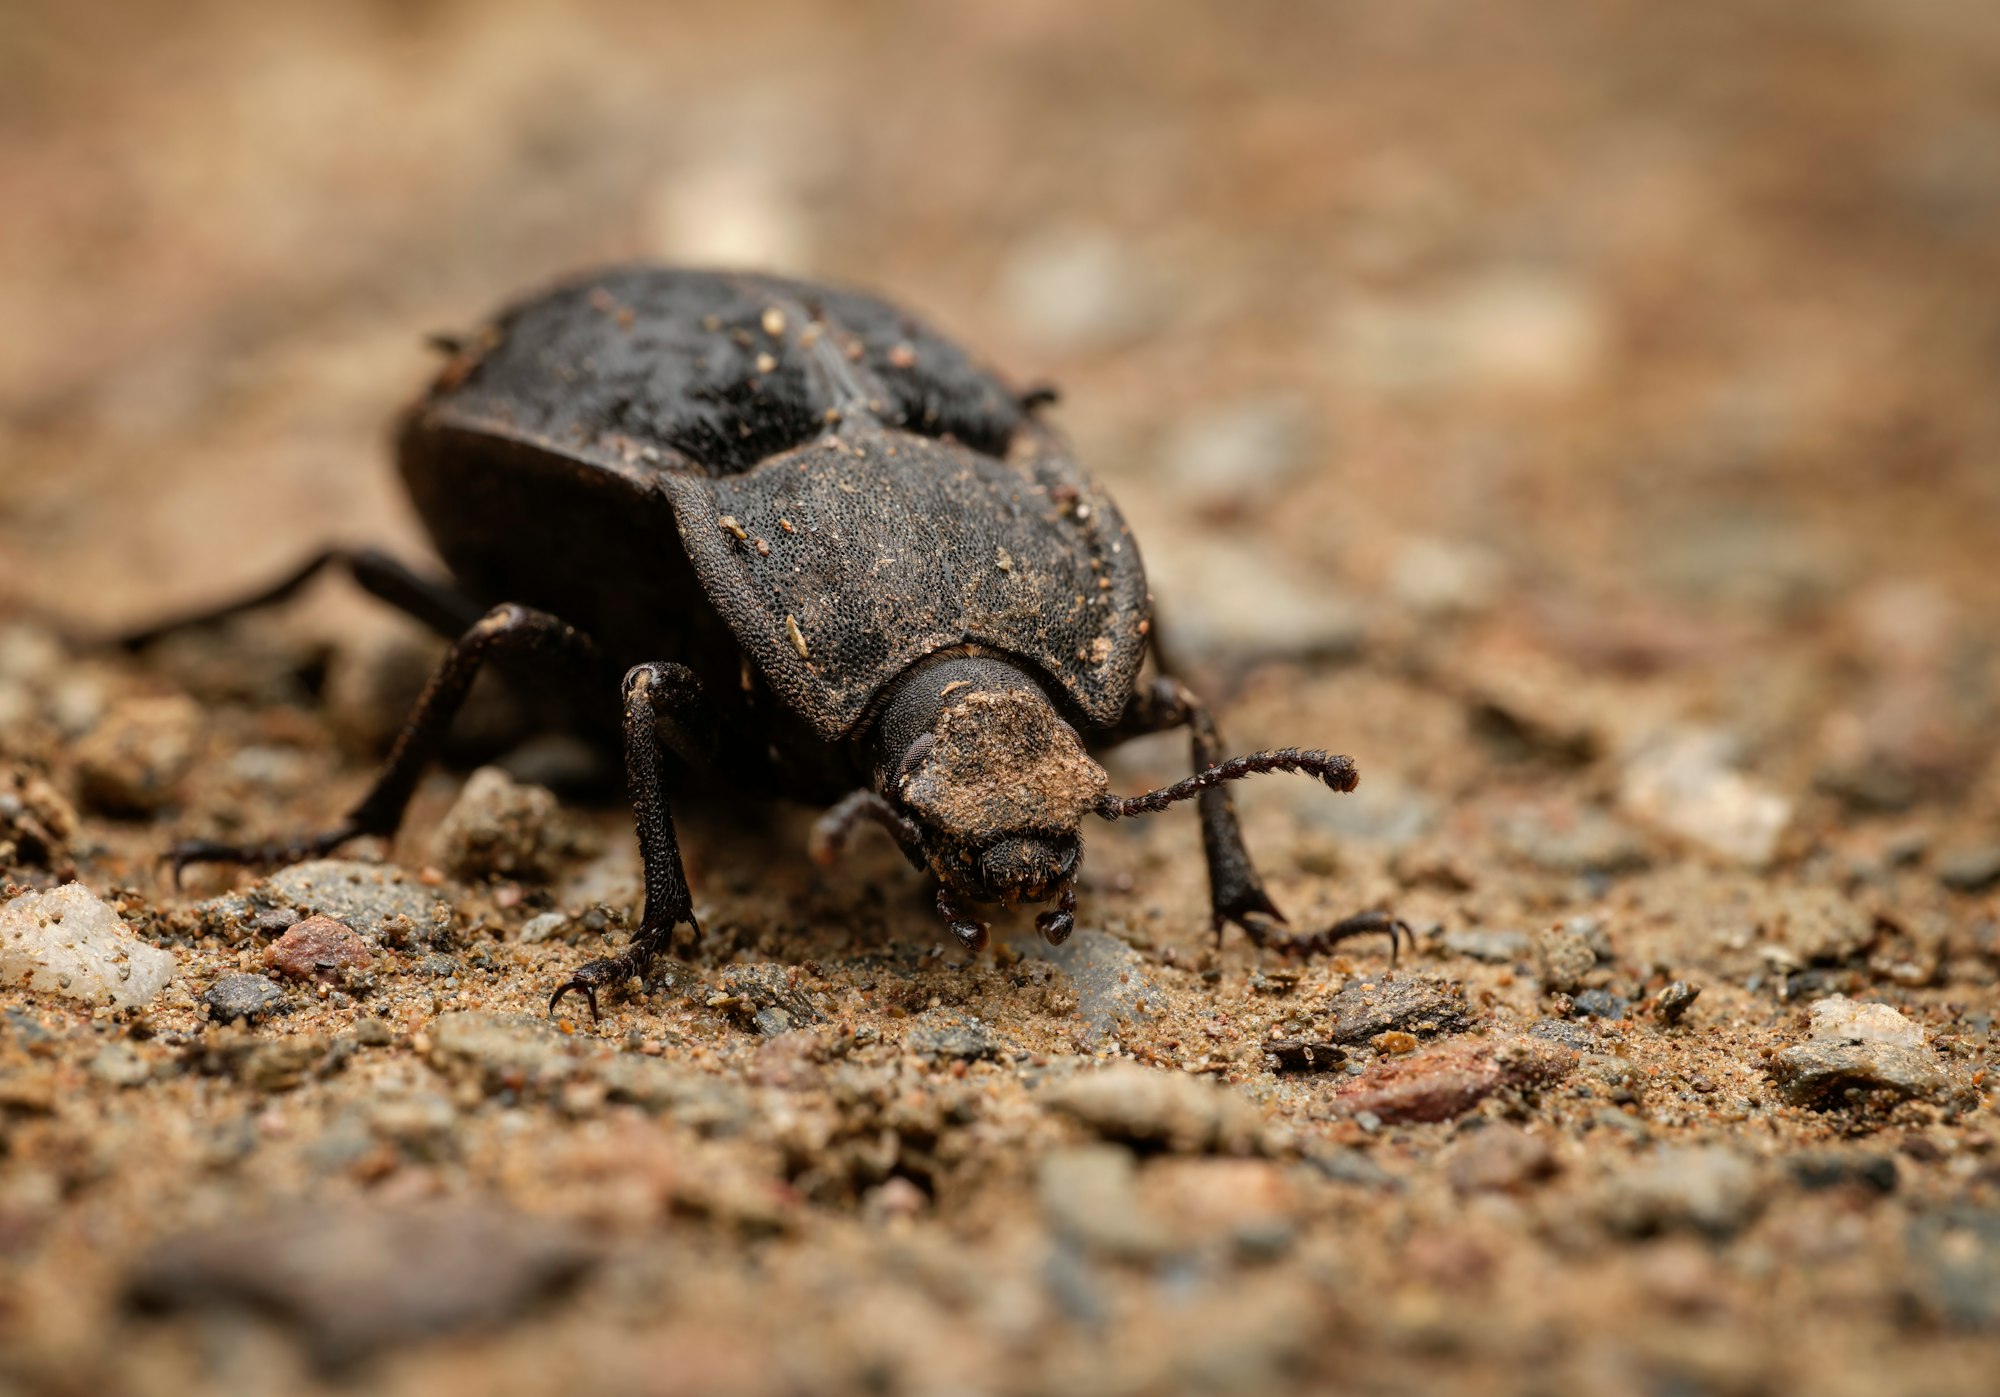 black beetle on brown soil in macro photography during daytime